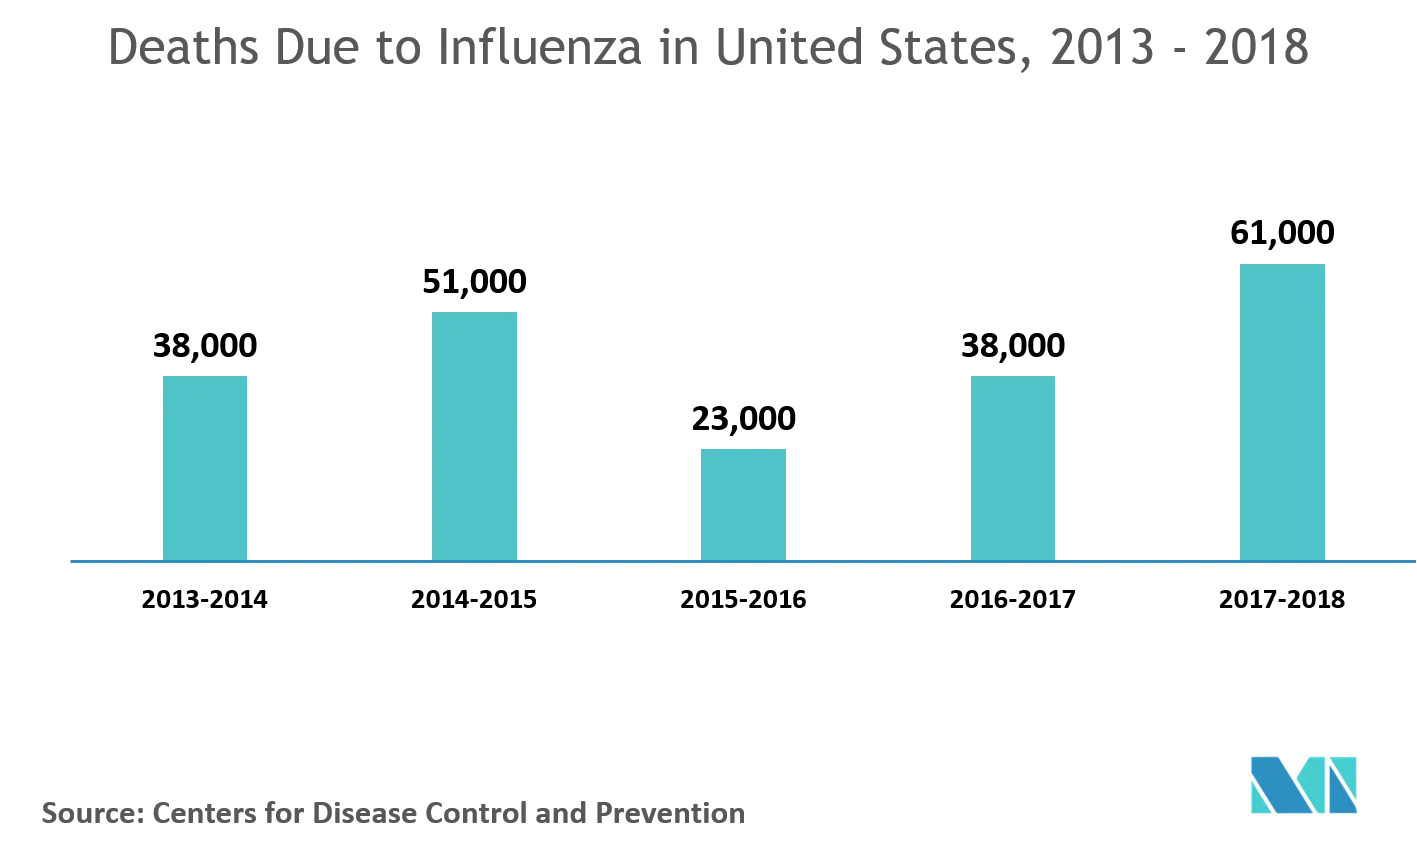 Influenza Medications Market: Deaths Due to Influenza in United States, 2013 2018